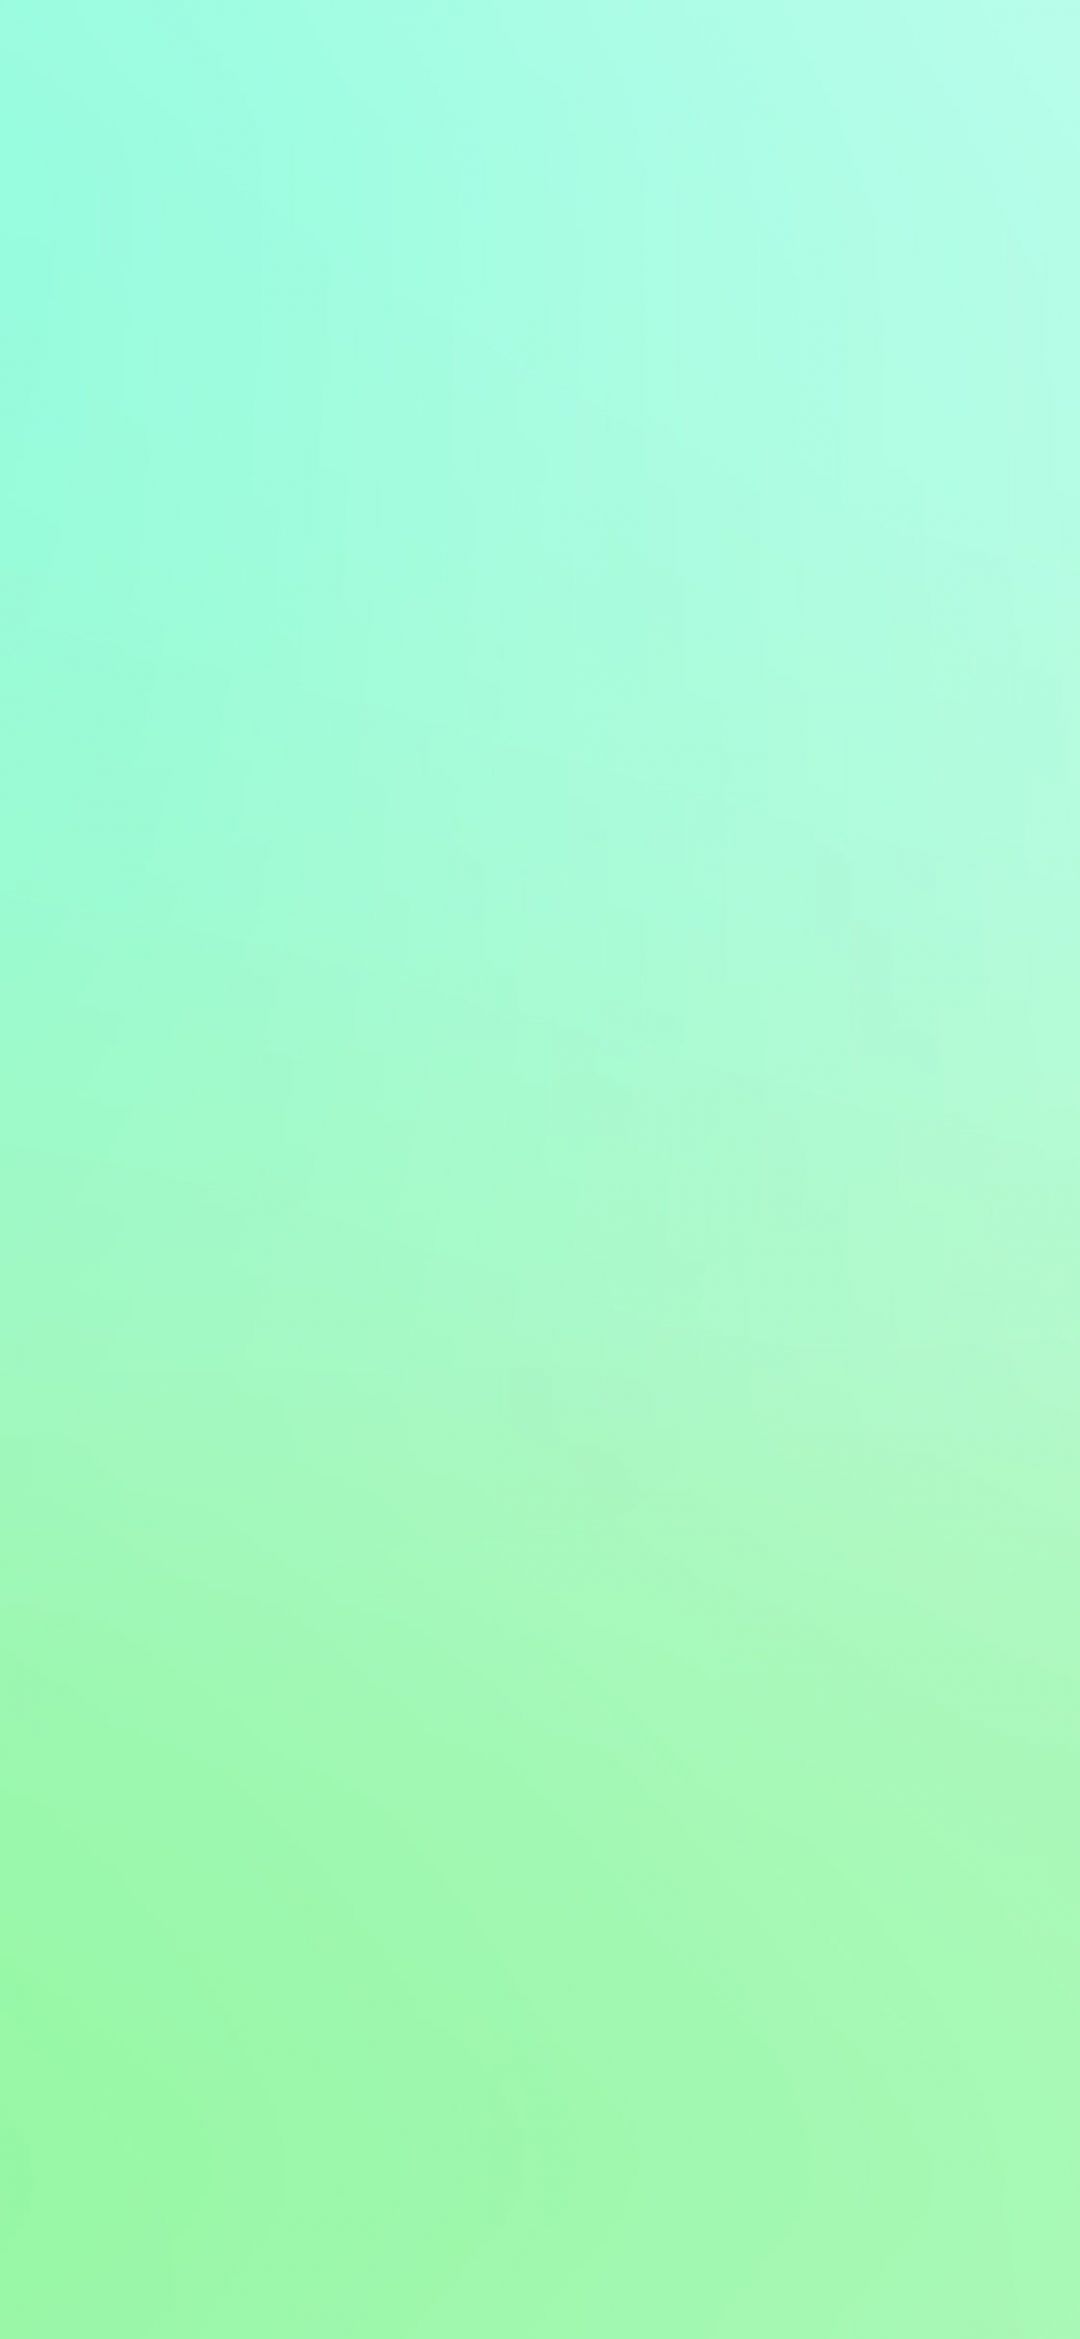 A green and blue background with an airplane flying in the sky - Mint green